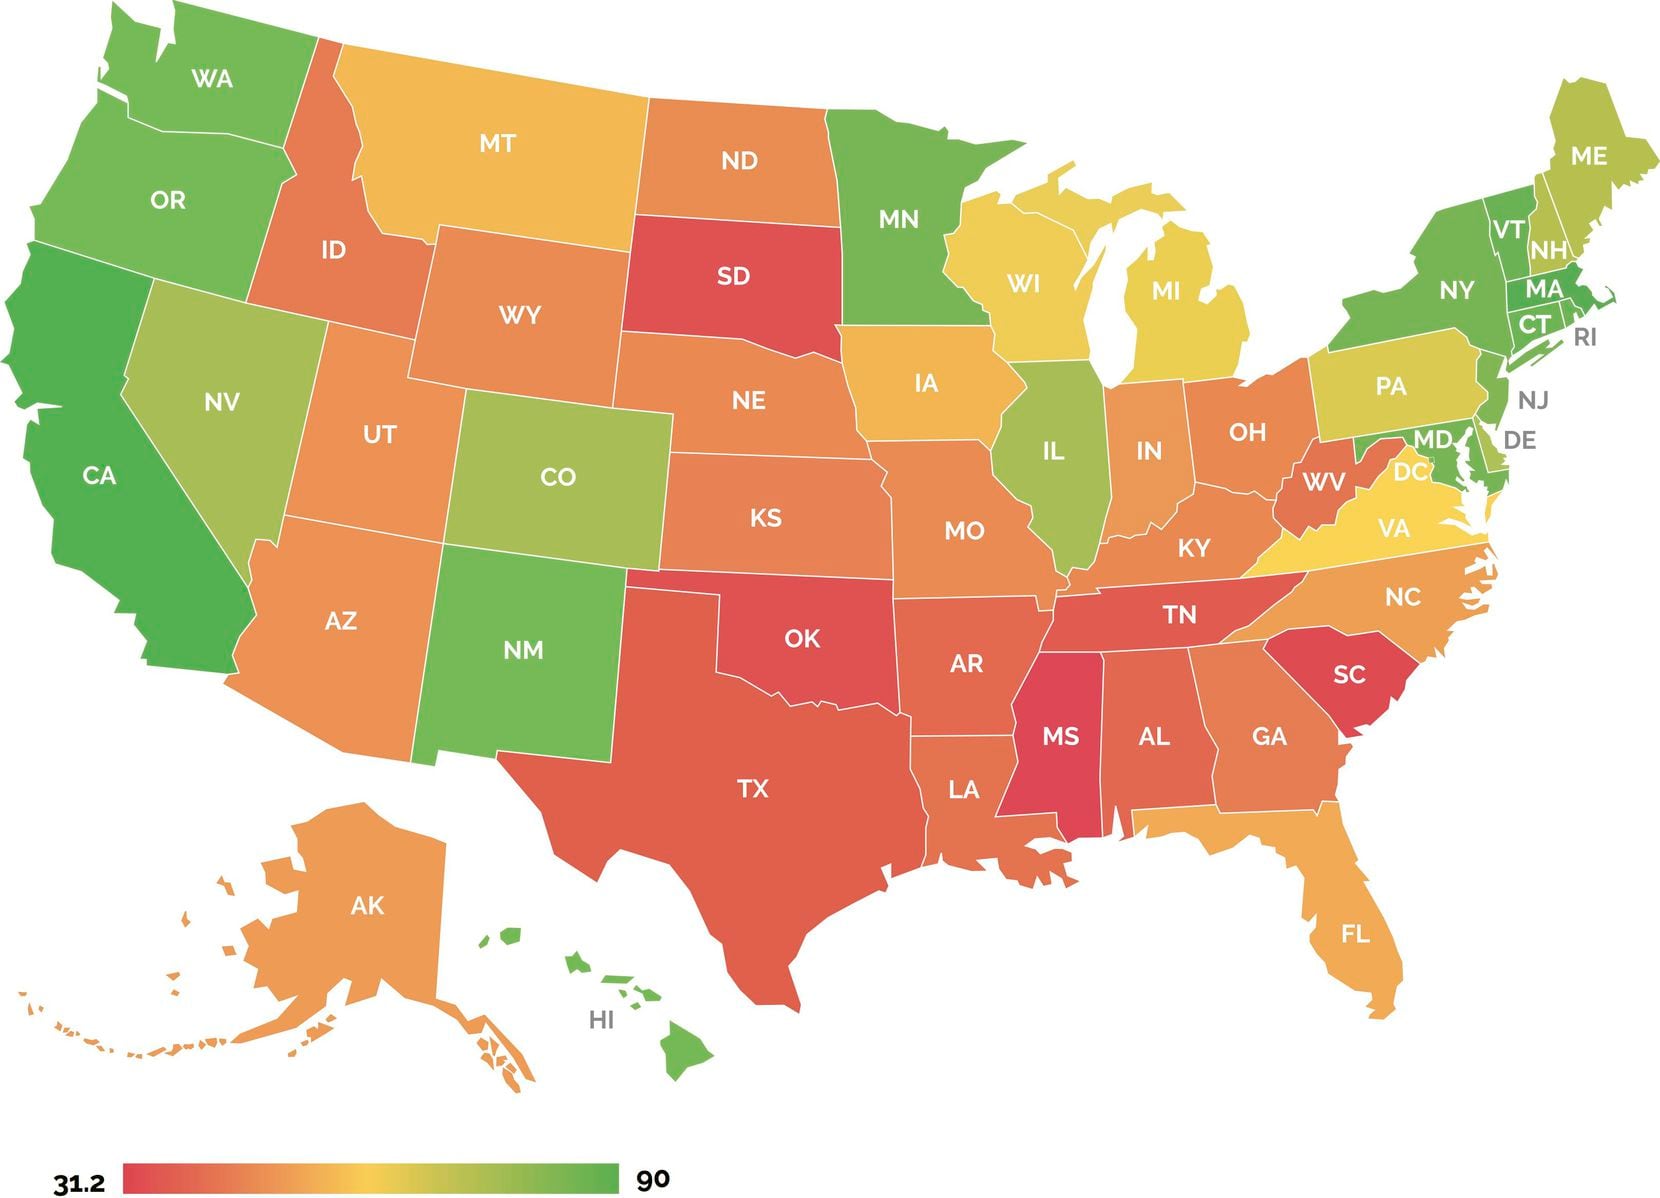 Out Leadership's heat map of states ranging from red to green based on how poorly or favorably they scored in an assessment of the inclusivity of each state's business environment.